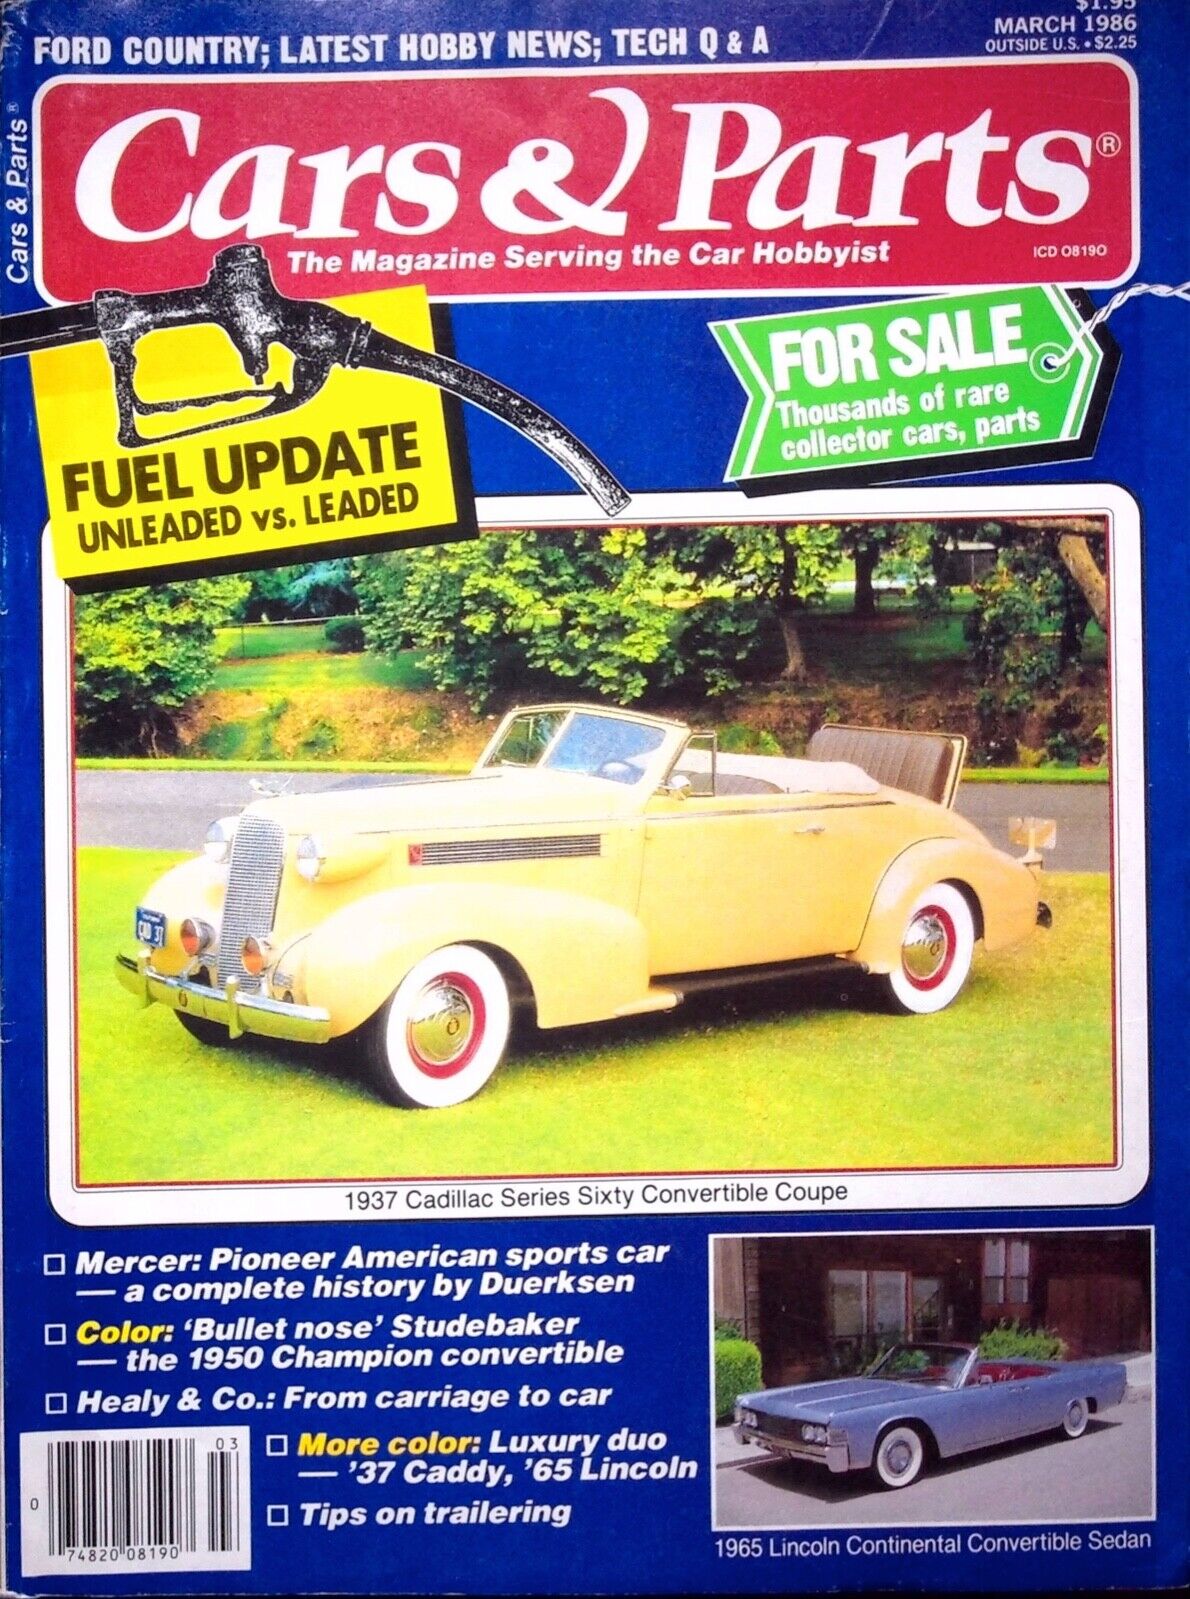 1937 CADILLAC SERIES SIXTY CONVERTIBLE COUPE - CAR & PARTS MAGAZINE, MARCH 1986